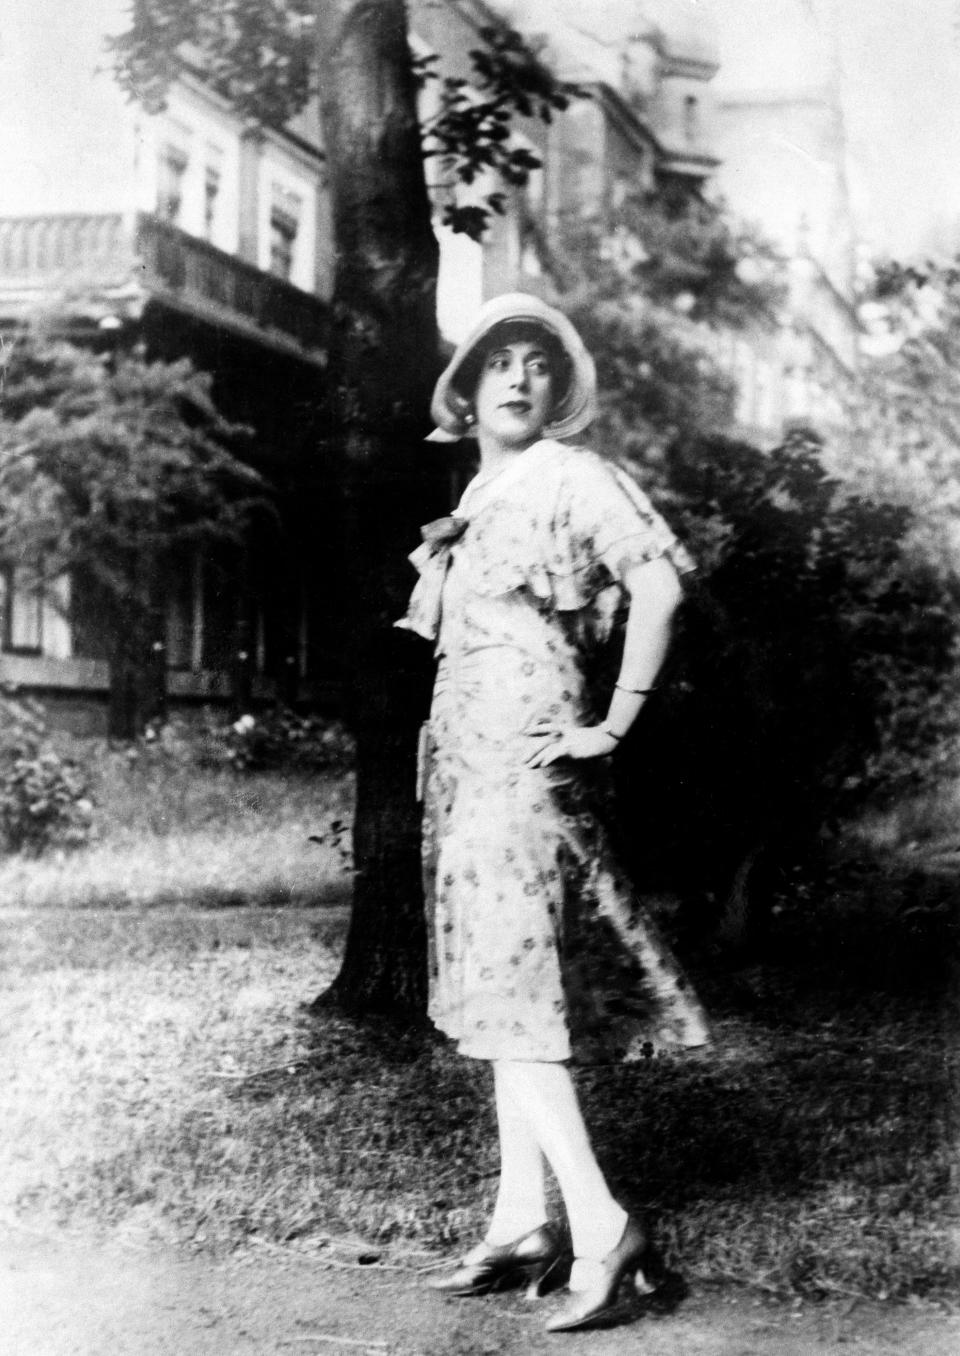 Black-and-white image of Lili Elbe posing next to a tree.